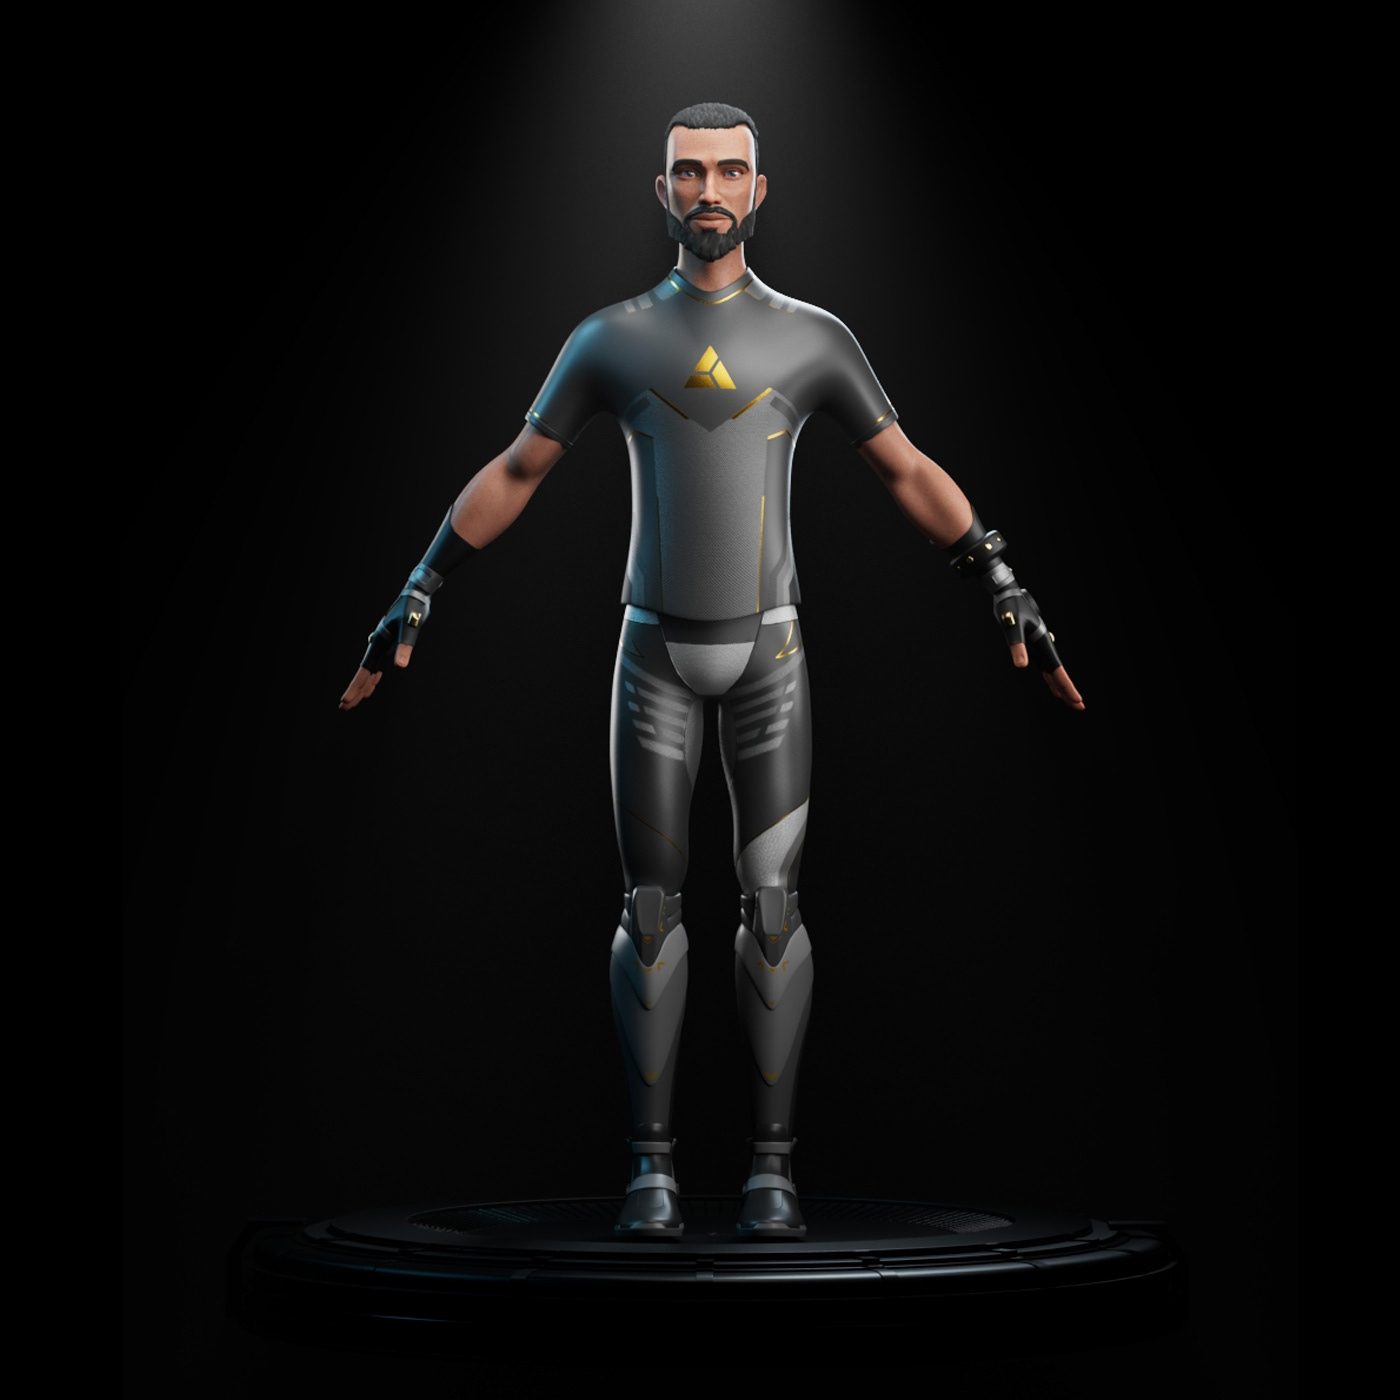 game 3D Render Maya modeling texturing animation  3D Character Design model game character